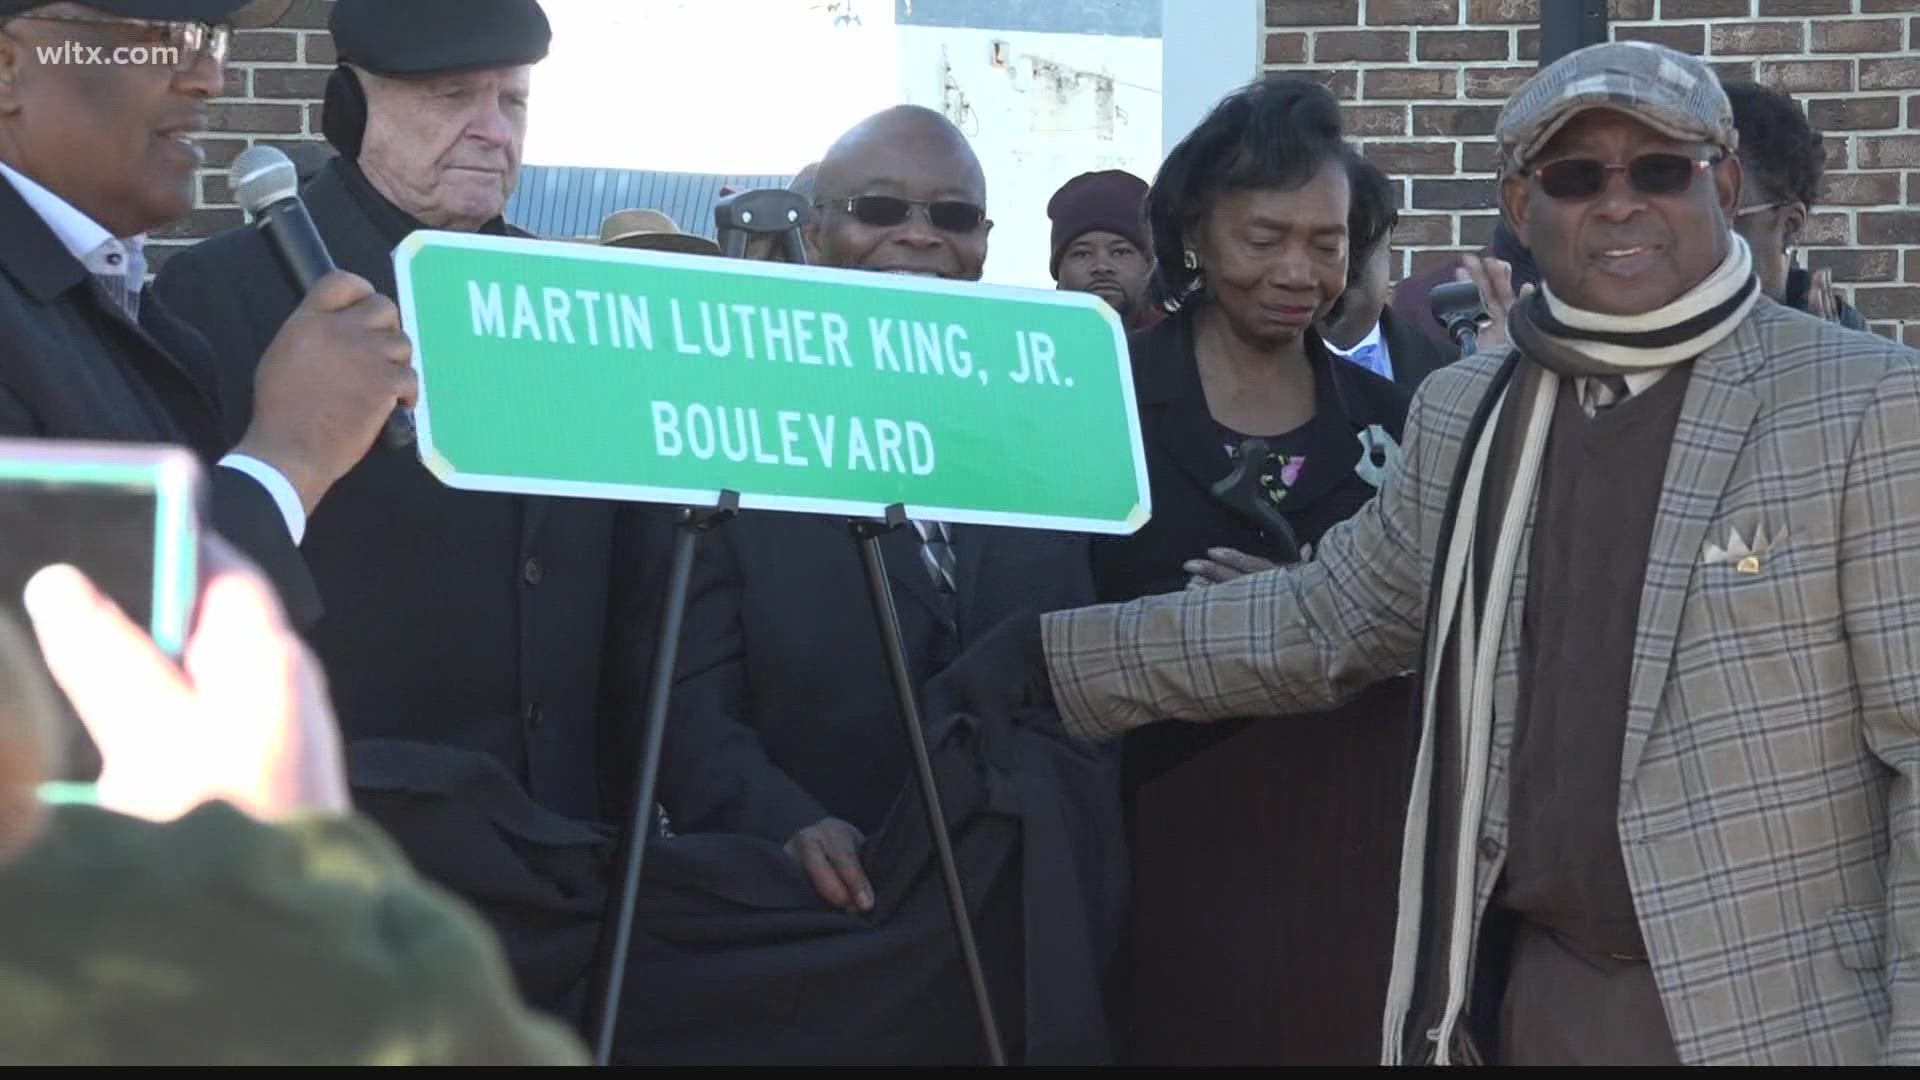 The city commemorated the street's renaming with a march and ceremony on Martin Luther King Jr. Day.